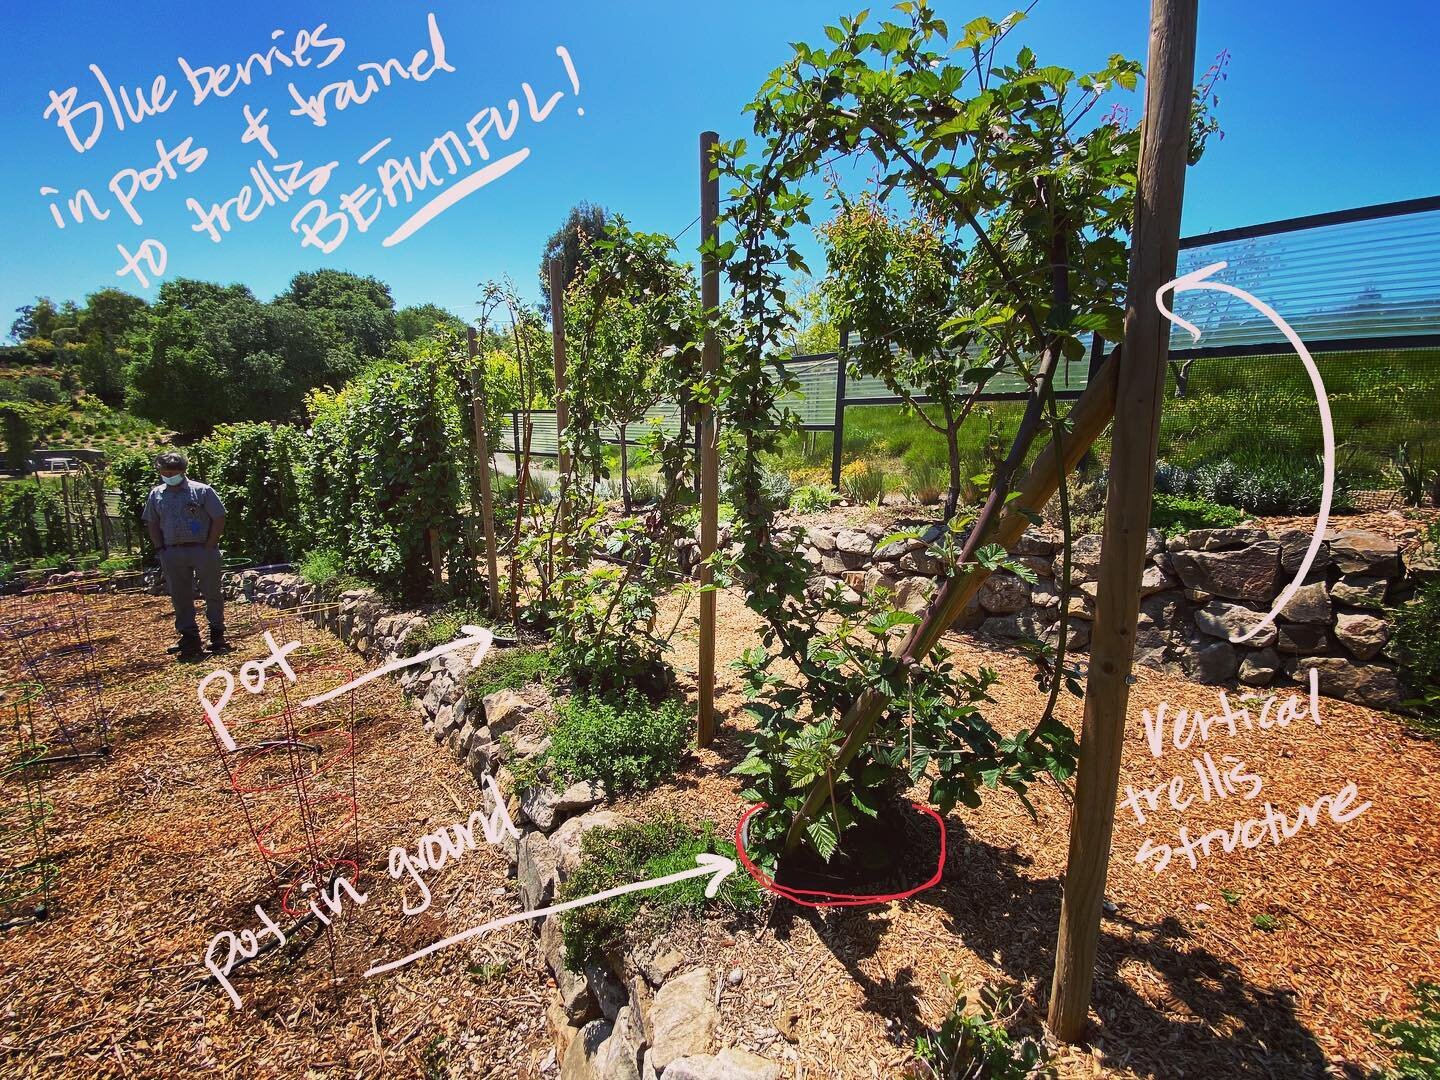 Veggie garden inspiration! I was fortunate to visit this amazing veggie garden and love how vines and espalier apple trees are used to create rooms and spaces. We&rsquo;re planting our veggie garden soon - more to come! #veggiegarden #espalier #lands